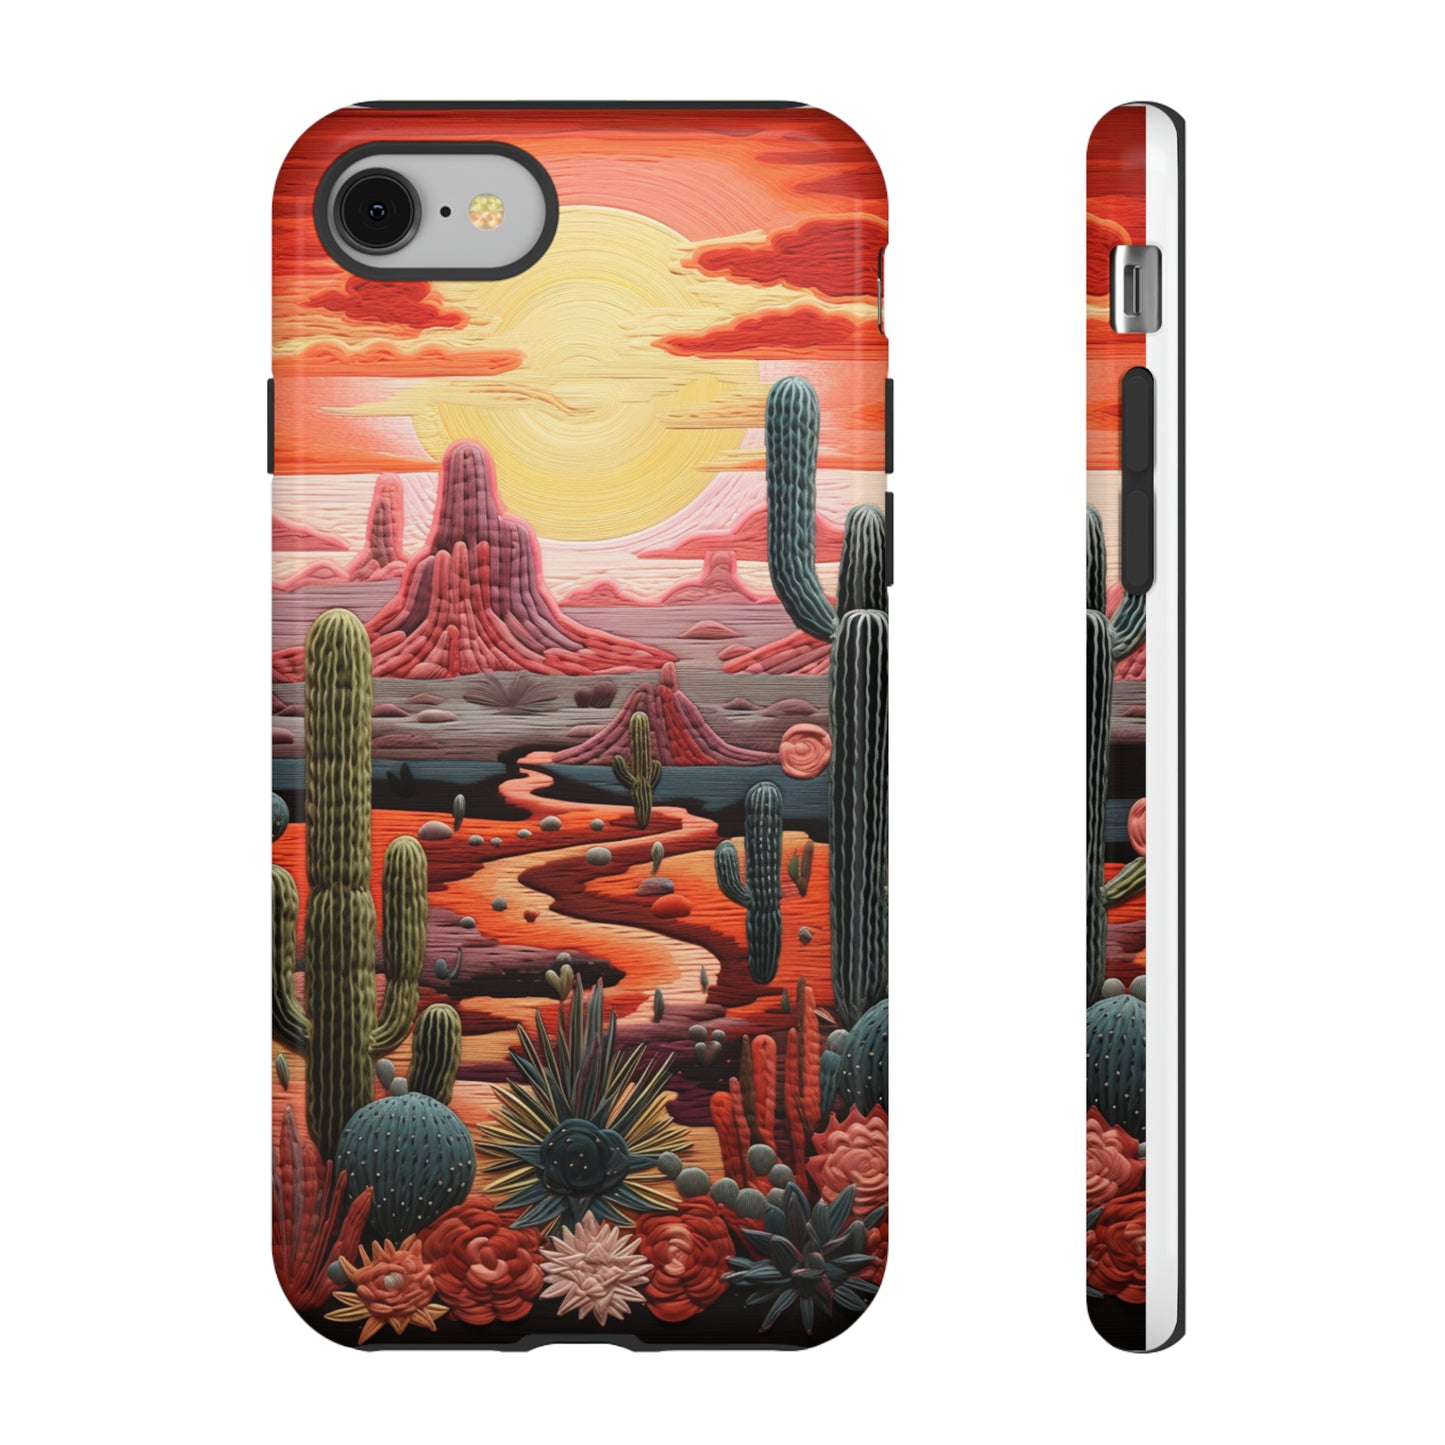 Wanderlust cactus sunset embroidery for iPhone XR